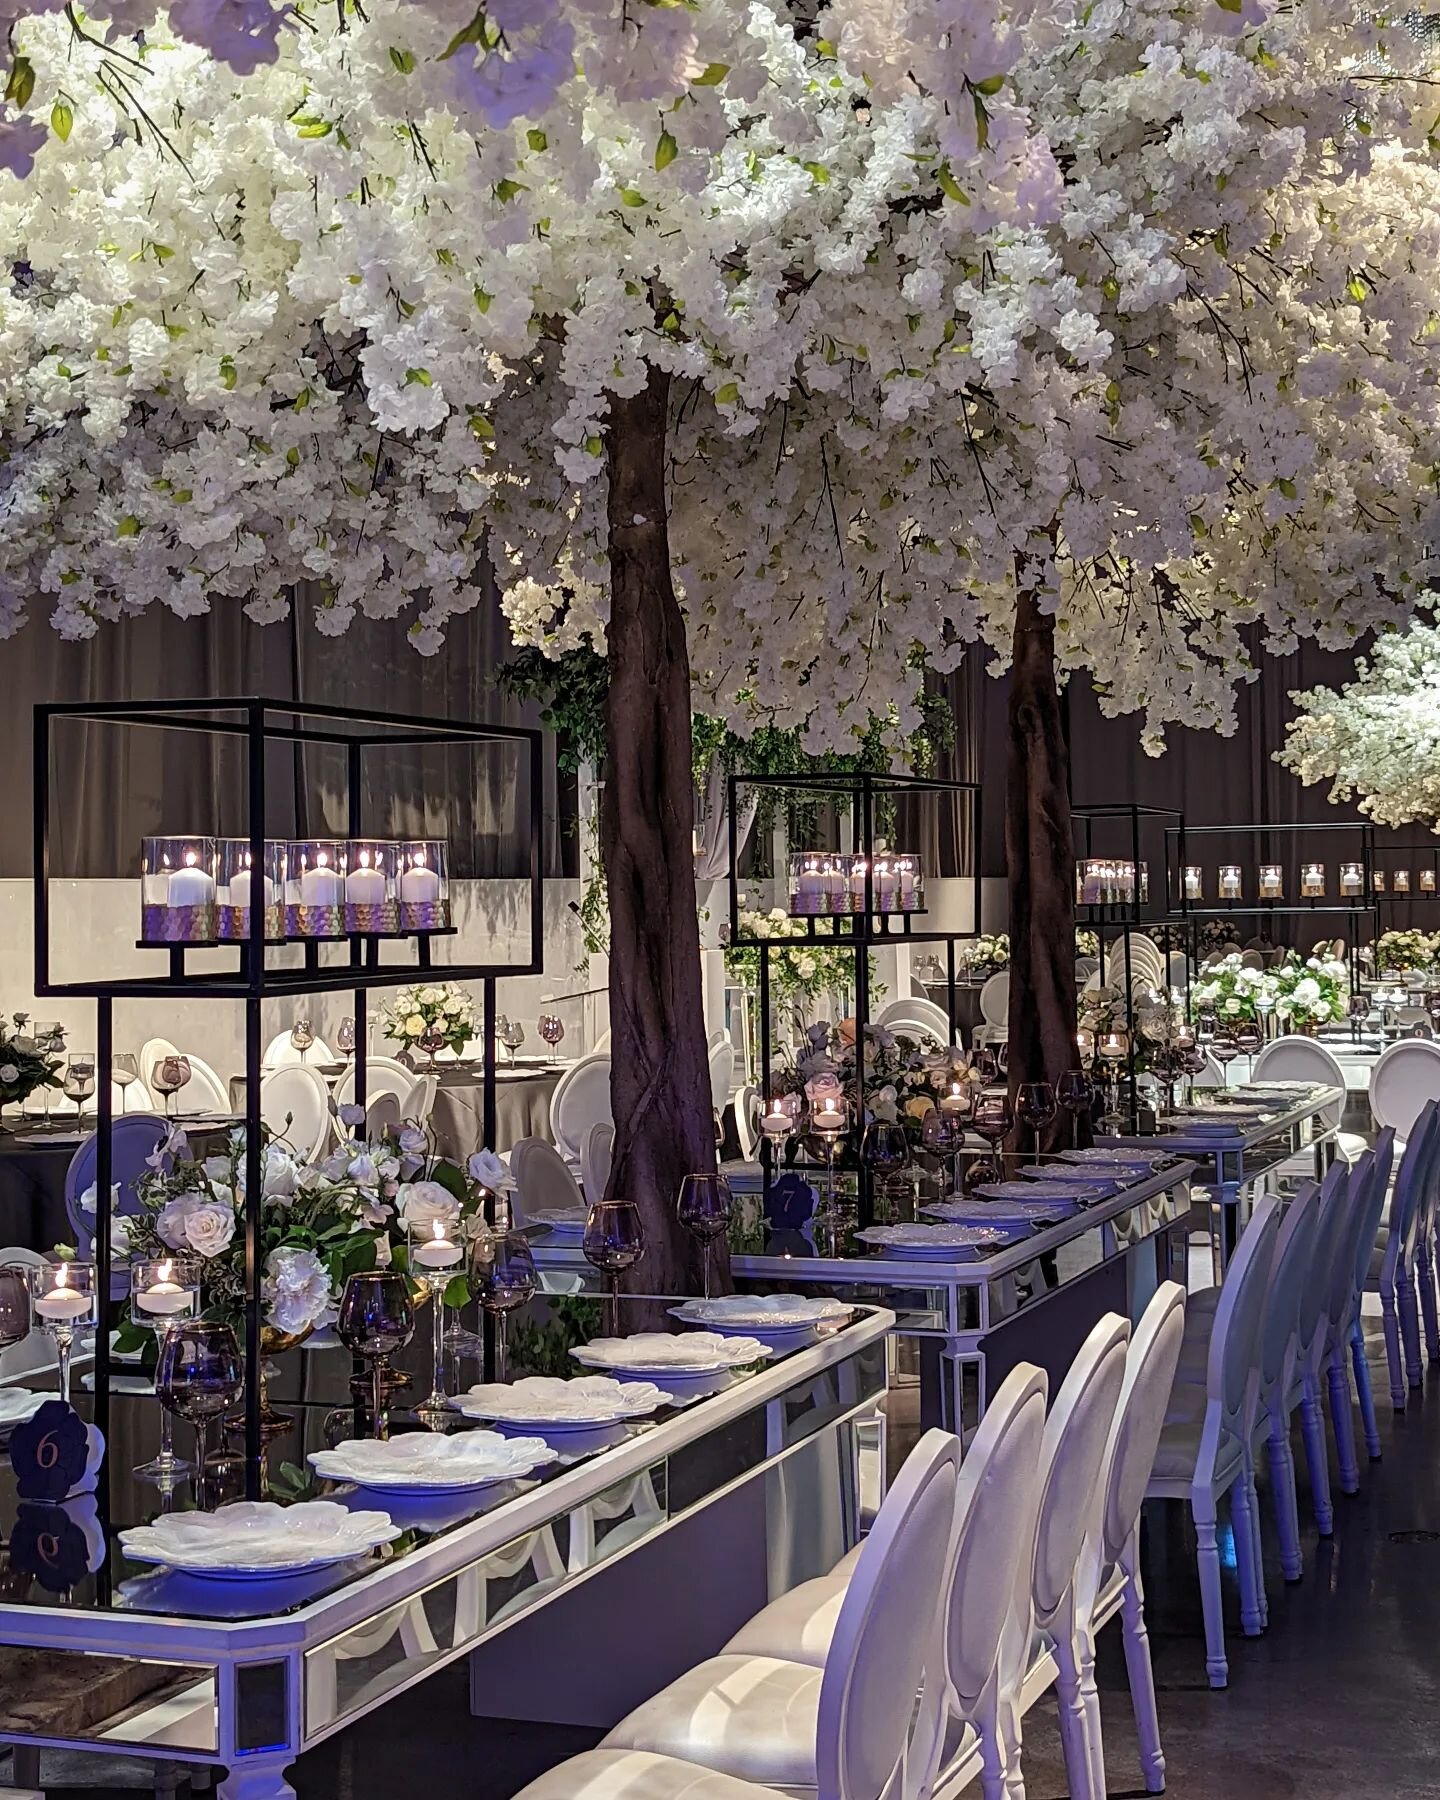 This evening with @AroraEvents guests dine under a canopy of oversized blossom trees. Reflective surfaces, soft floral, and candlelight create a sophisticated ambience. #PARASEvents #PARASEventsRentals #eventdesign #eventdecor #wedding #weddingdecor 